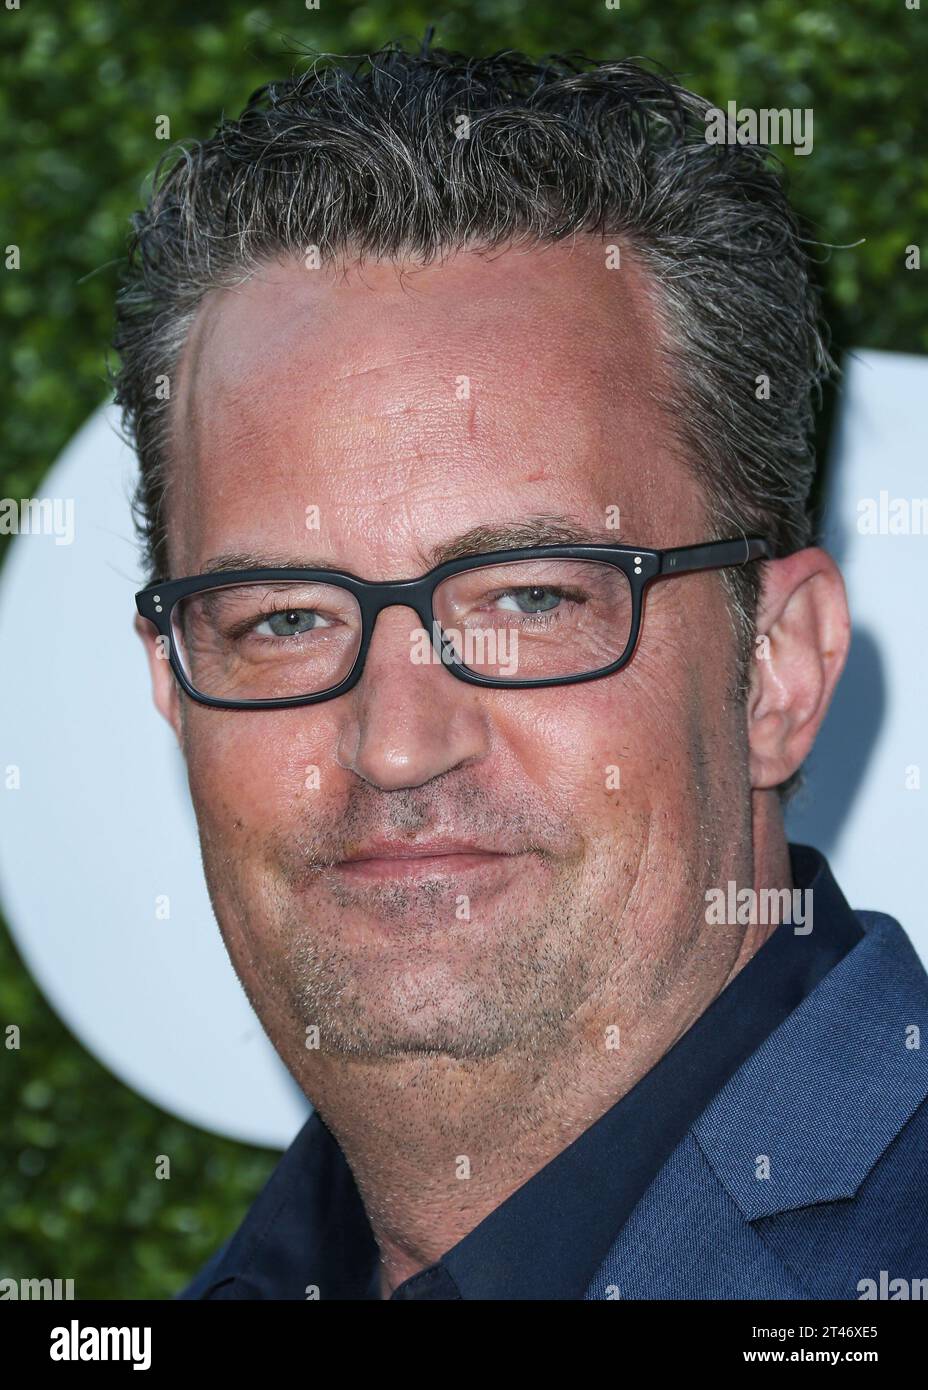 (FILE) Matthew Perry Dead At 54. Matthew Perry has died. He was 54. The actor, who was best known for playing Chandler Bing on 'Friends', was found dead at a Los Angeles-area home on Saturday, October 28, 2023. WEST HOLLYWOOD, LOS ANGELES, CALIFORNIA, USA - AUGUST 10: American-Canadian actor, comedian and producer Matthew Perry (Matthew Langford Perry) arrives at the CBS, CW And Showtime Summer TCA Party 2016 held at the Pacific Design Center on August 10, 2016 in West Hollywood, Los Angeles, California, United States. (Photo by Xavier Collin/Image Press Agency) Stock Photo